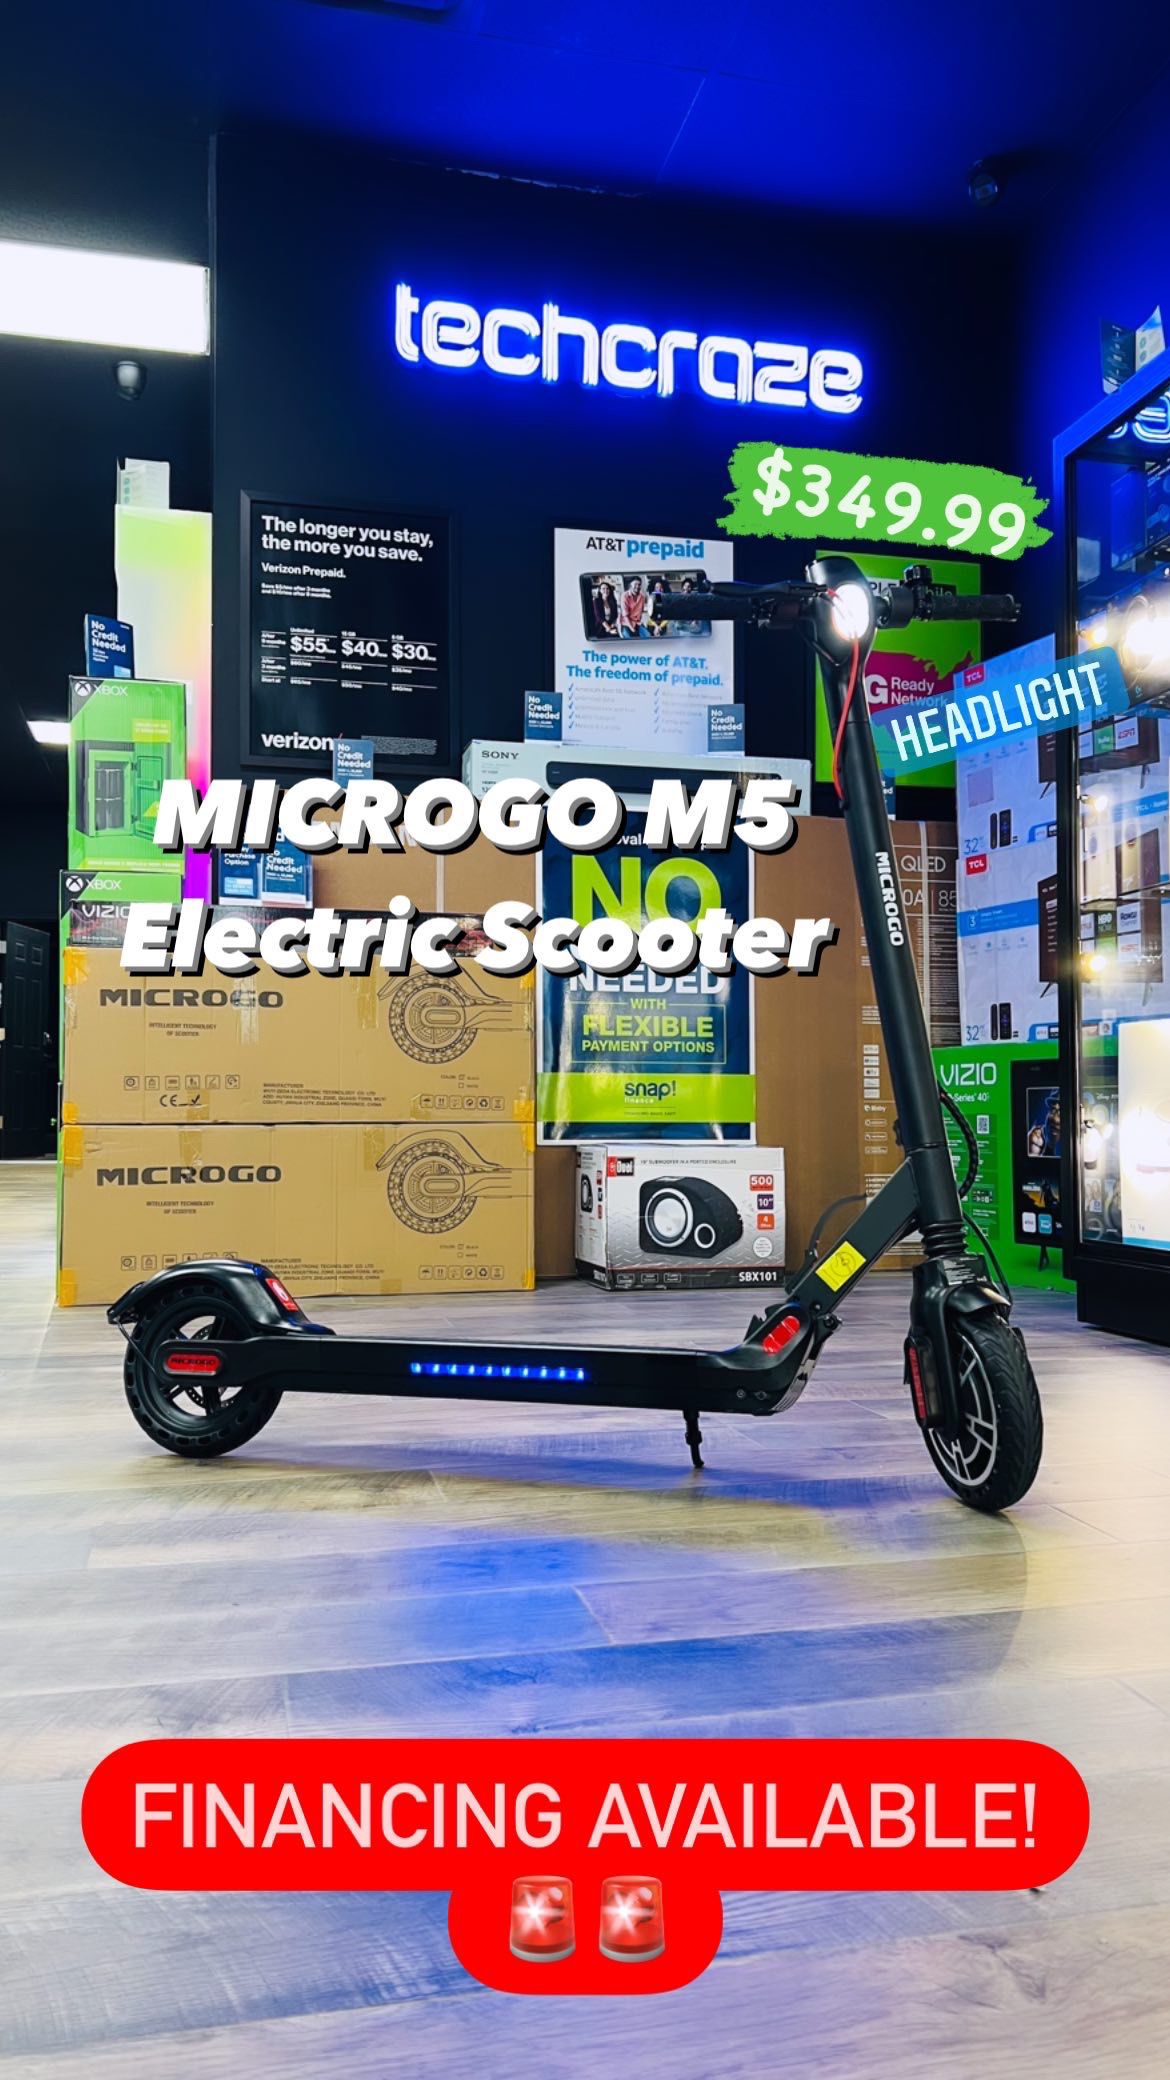 MICROGO M5 Electric Scooter -With LED Headlight- **BRAND NEW**